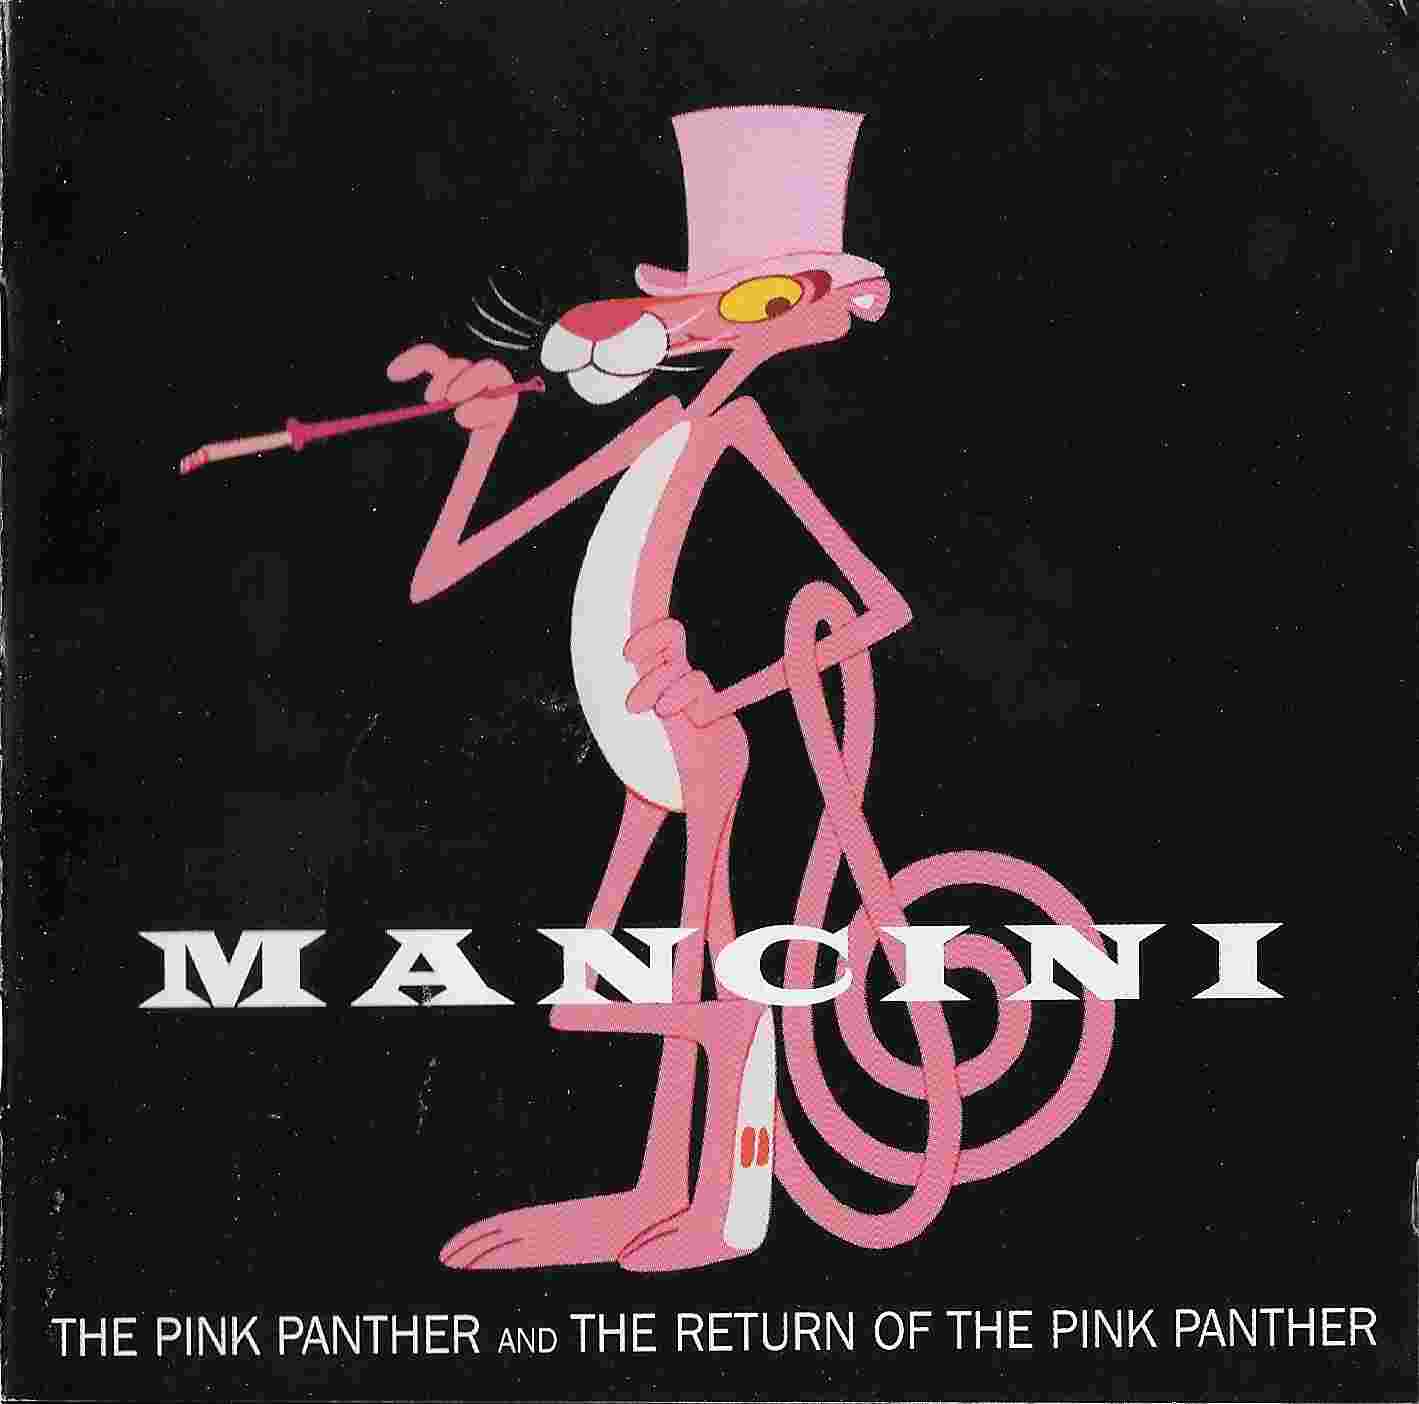 Picture of BM 720 The Pink Panther / The return of the Pink Panther by artist Henry Mancini from ITV, Channel 4 and Channel 5 cds library